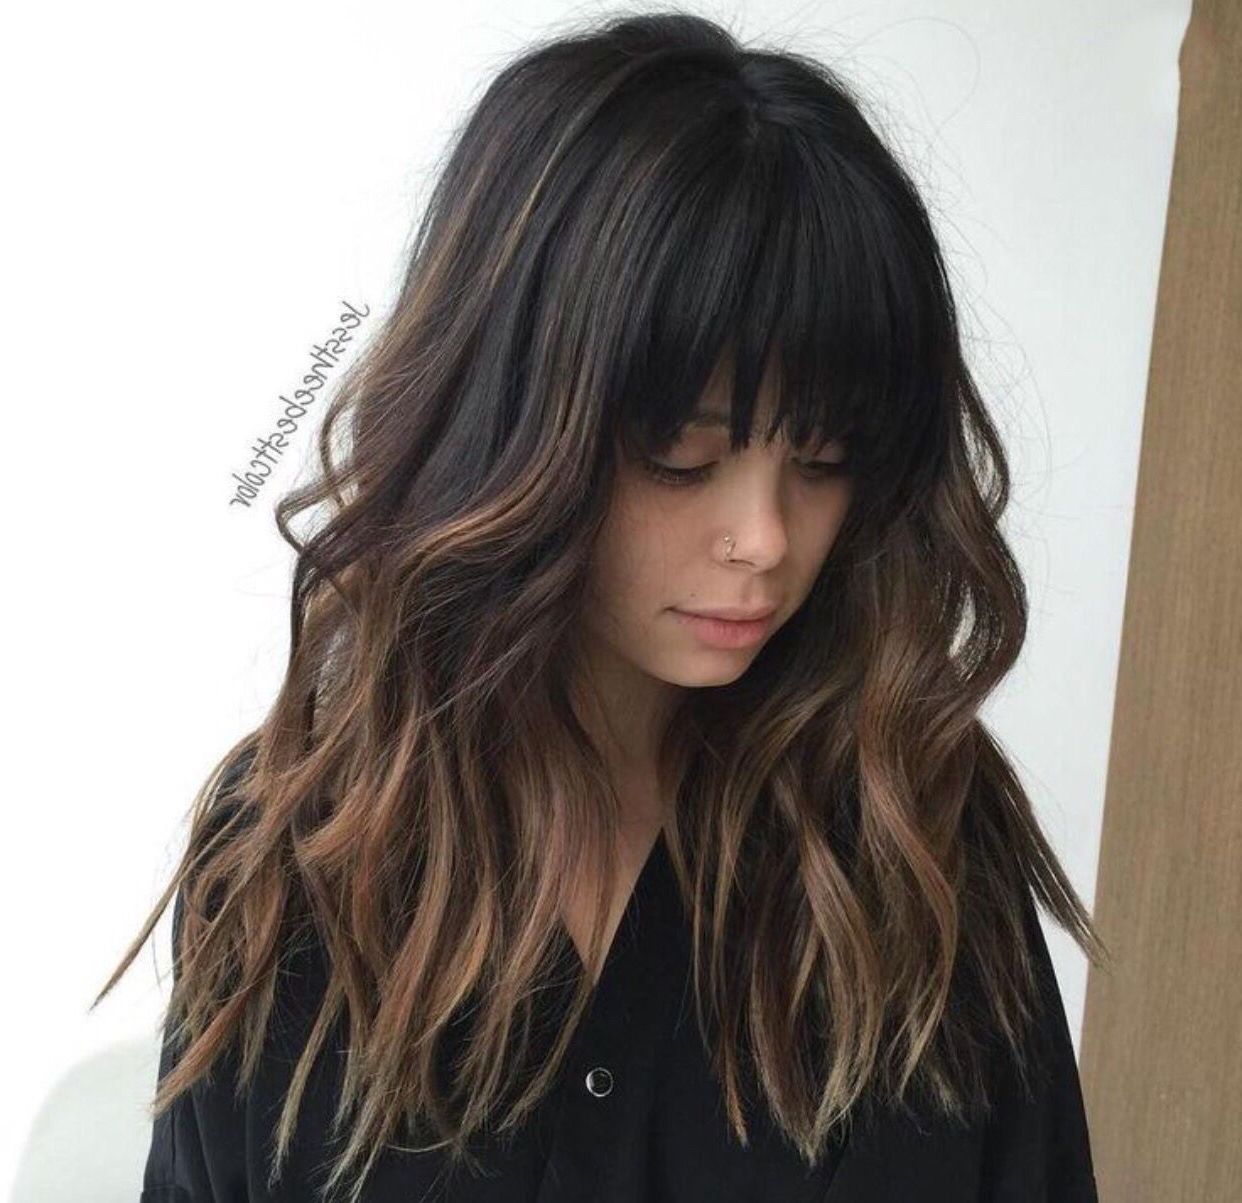 Most Current Black To Light Brown Ombre Waves Hairstyles With Black Hair, With Bangs, And Some Ombré, With Beach Waves (View 20 of 20)